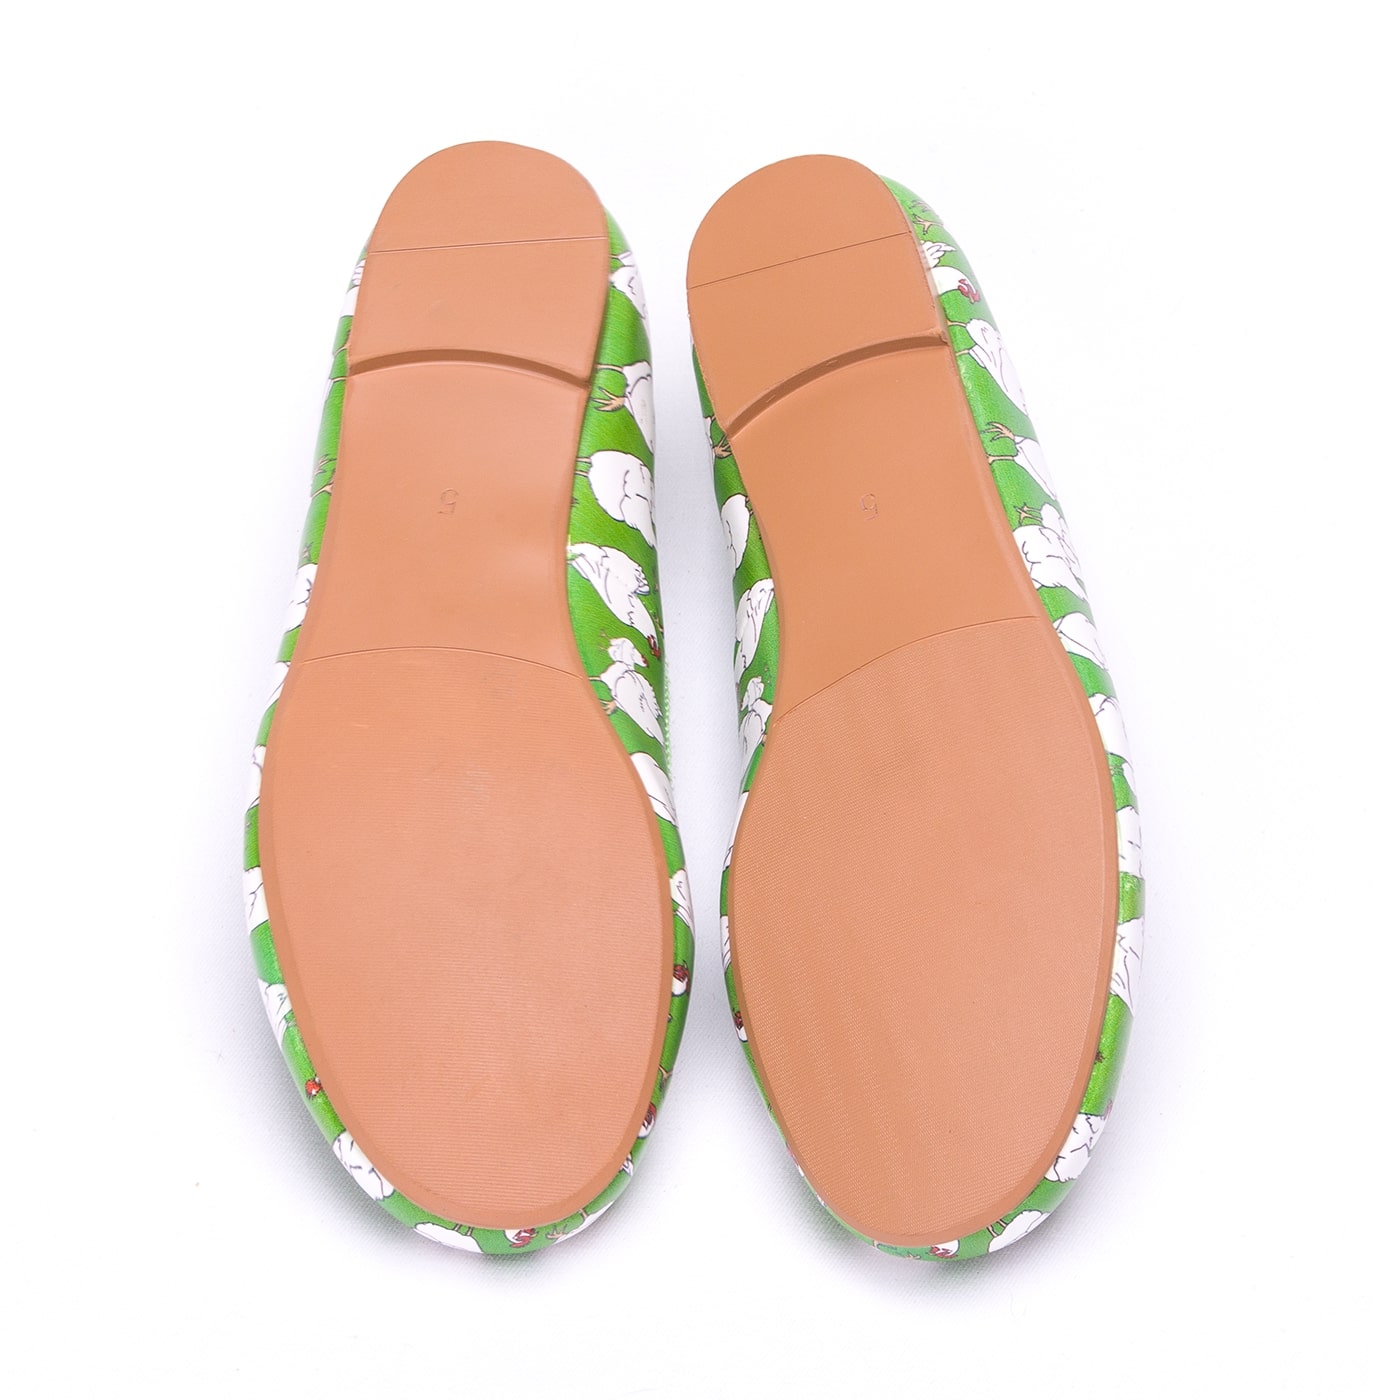 Flock Ballet Flats by RainbowsAndFairies.com (Chicken - Chooks - Bright Green - Quirky Shoes - Slip Ons - Comfy Flats) - SKU: FW_BALET_FLOCK_ORG - Pic 06